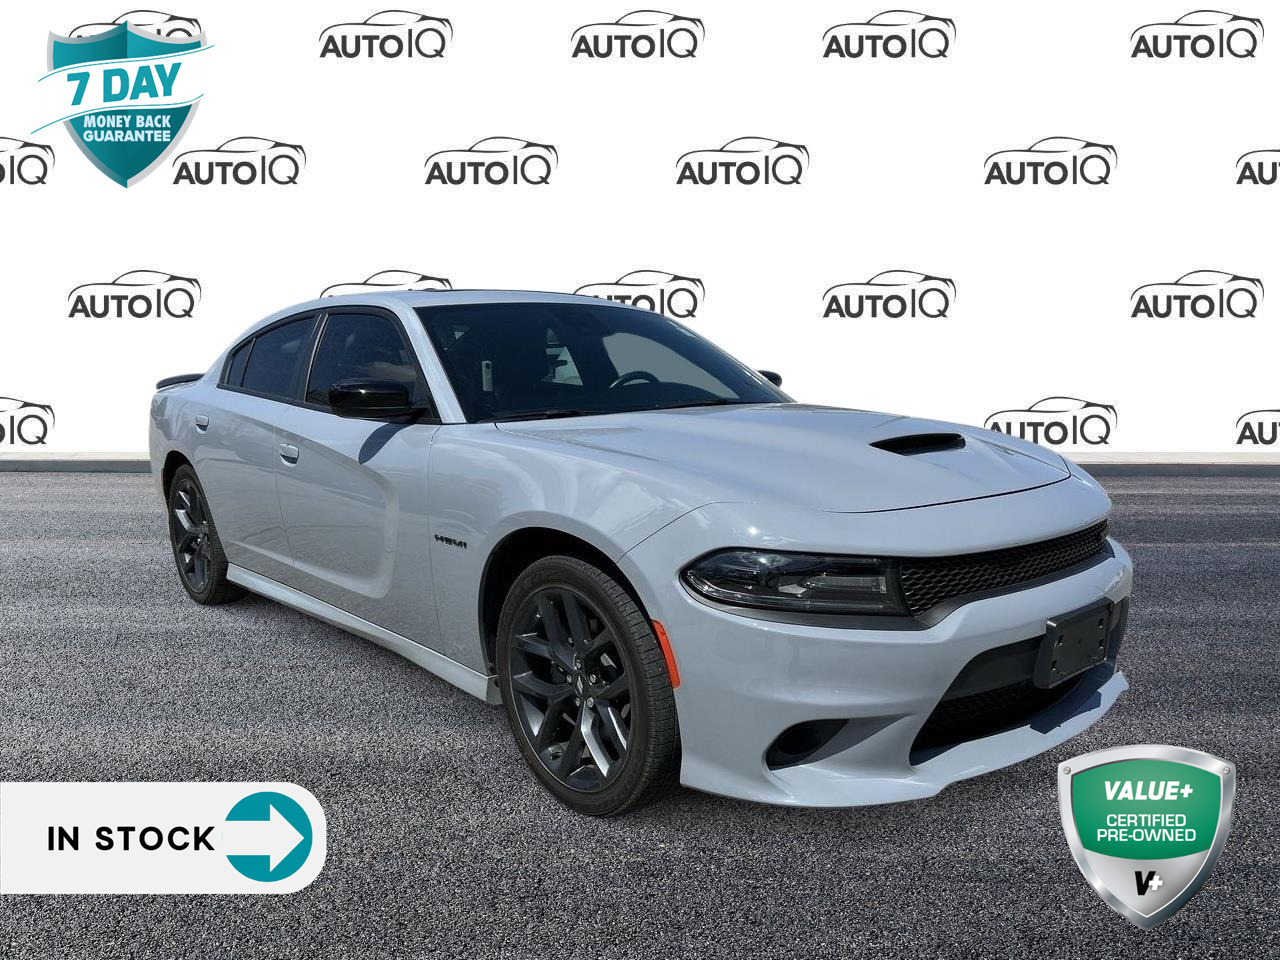 2021 Dodge Charger R/T $363 BI-WEEKLY + HST